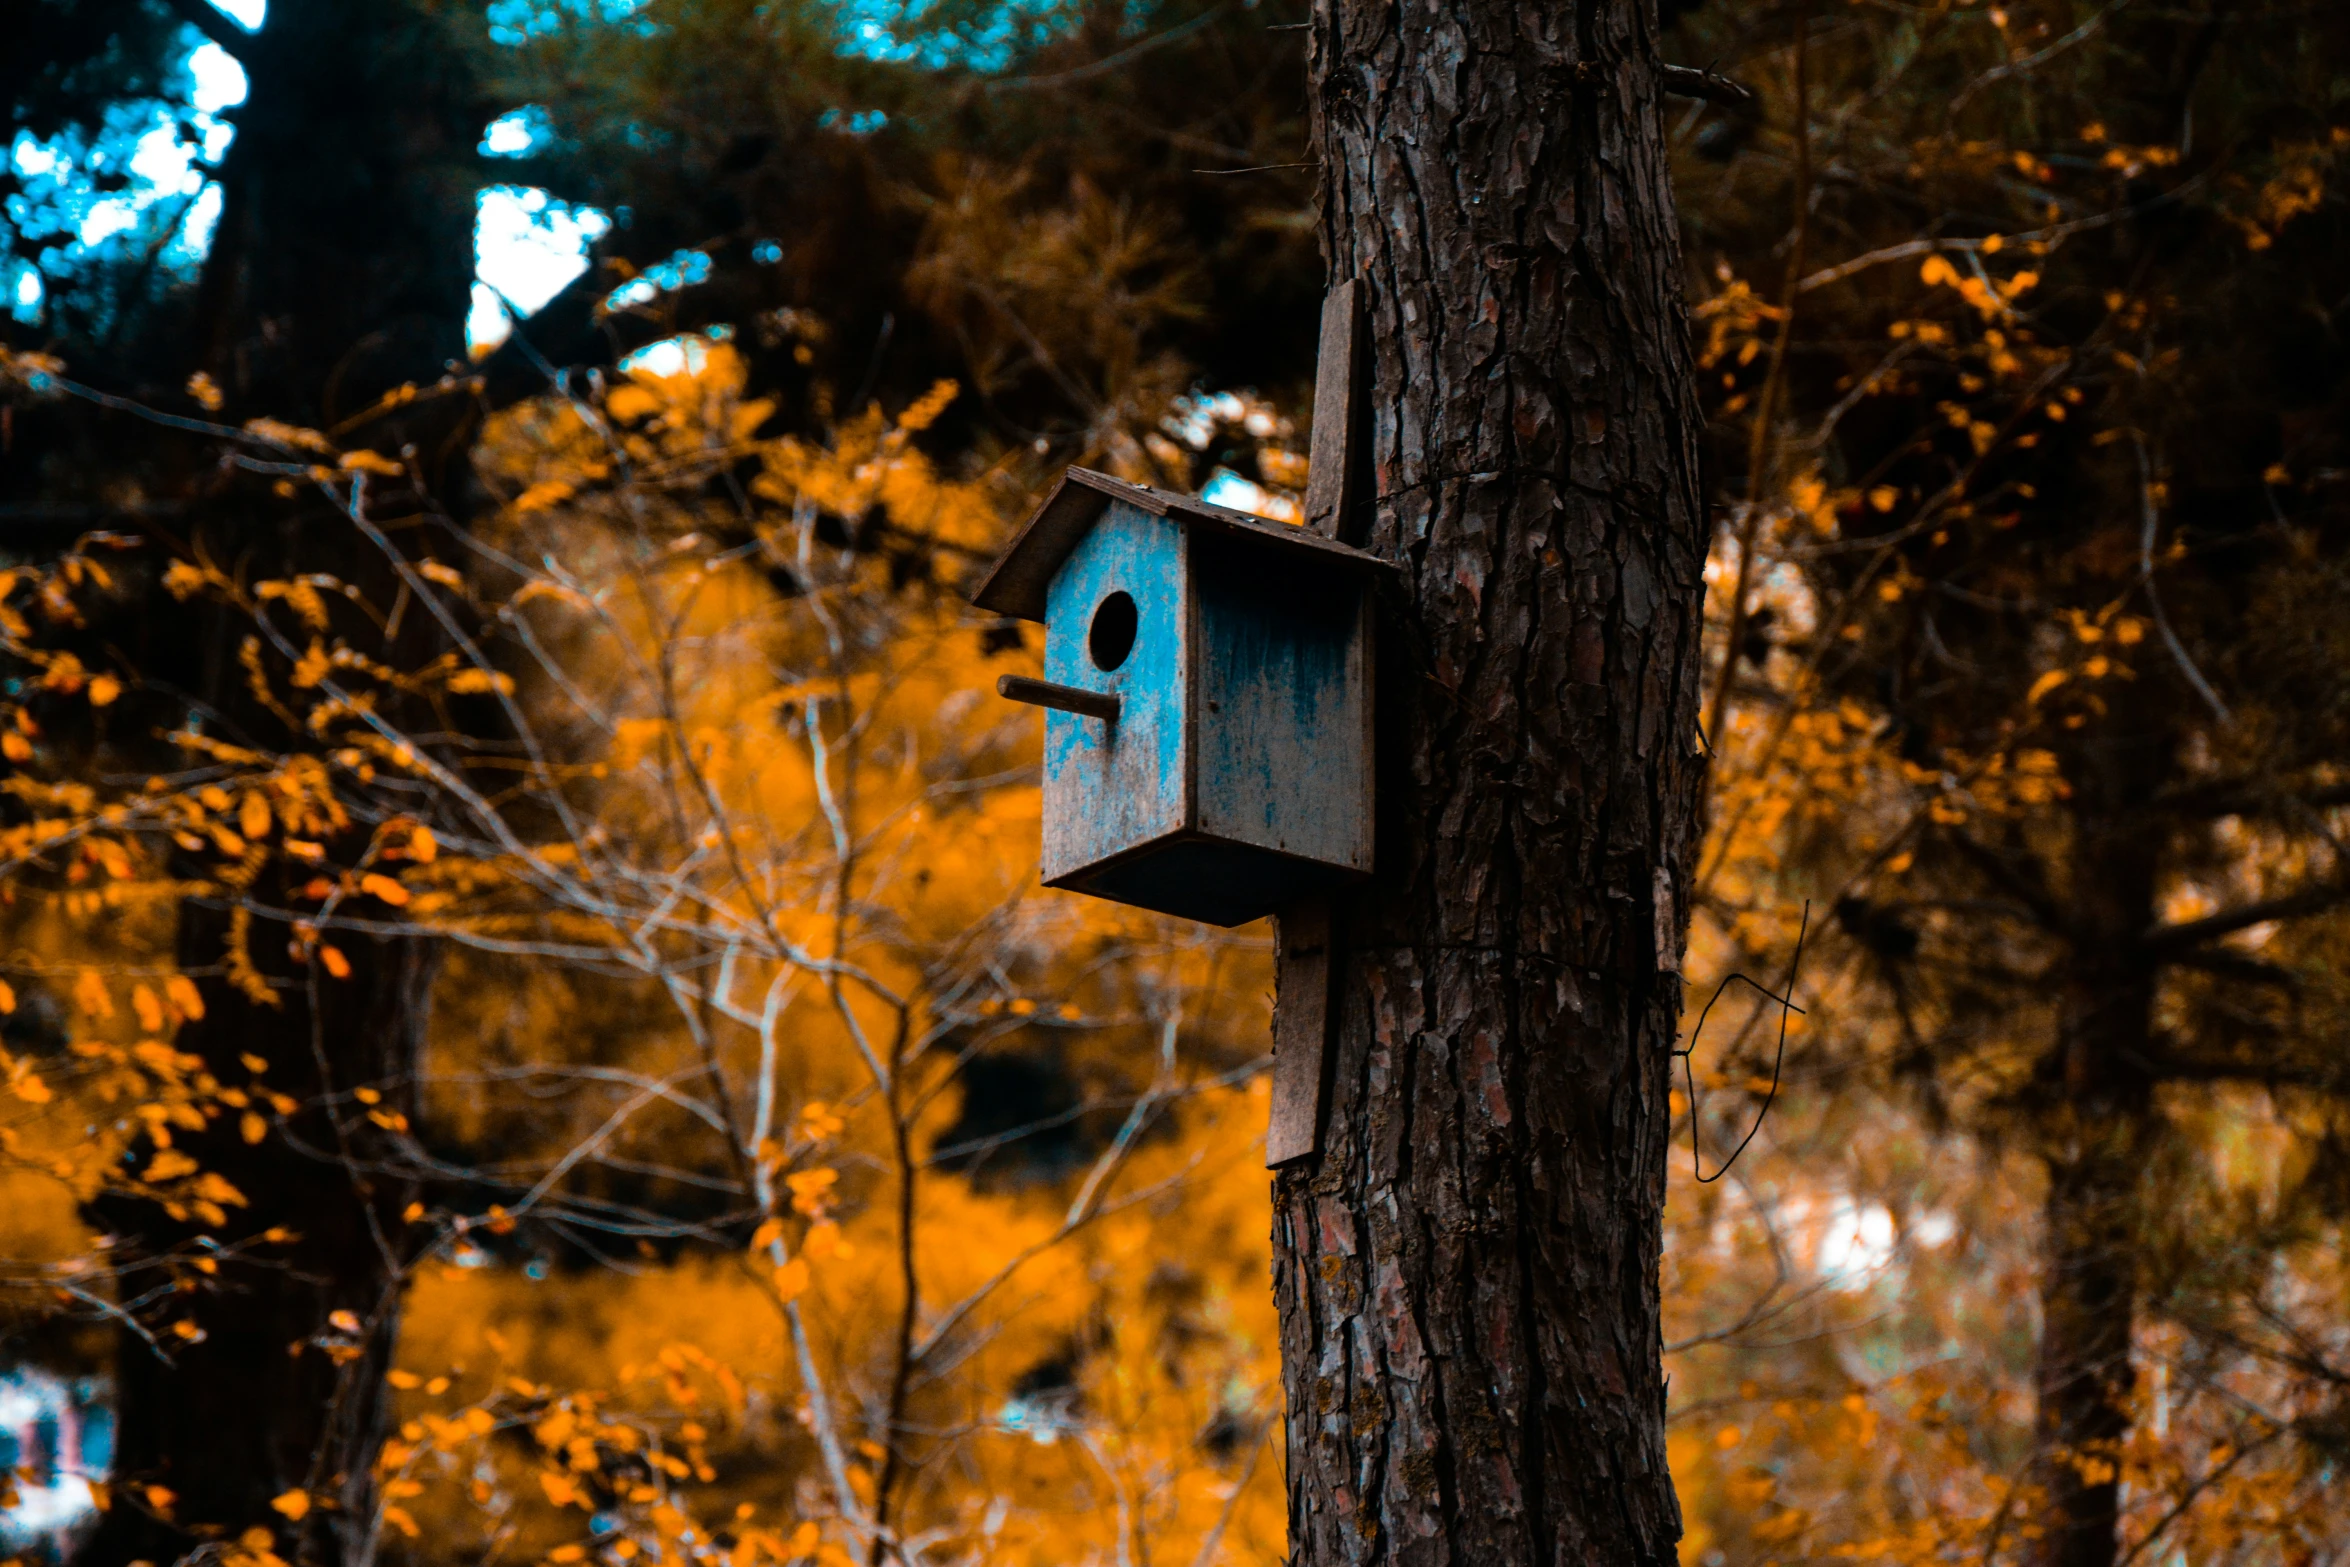 bird house built in the trees next to the forest